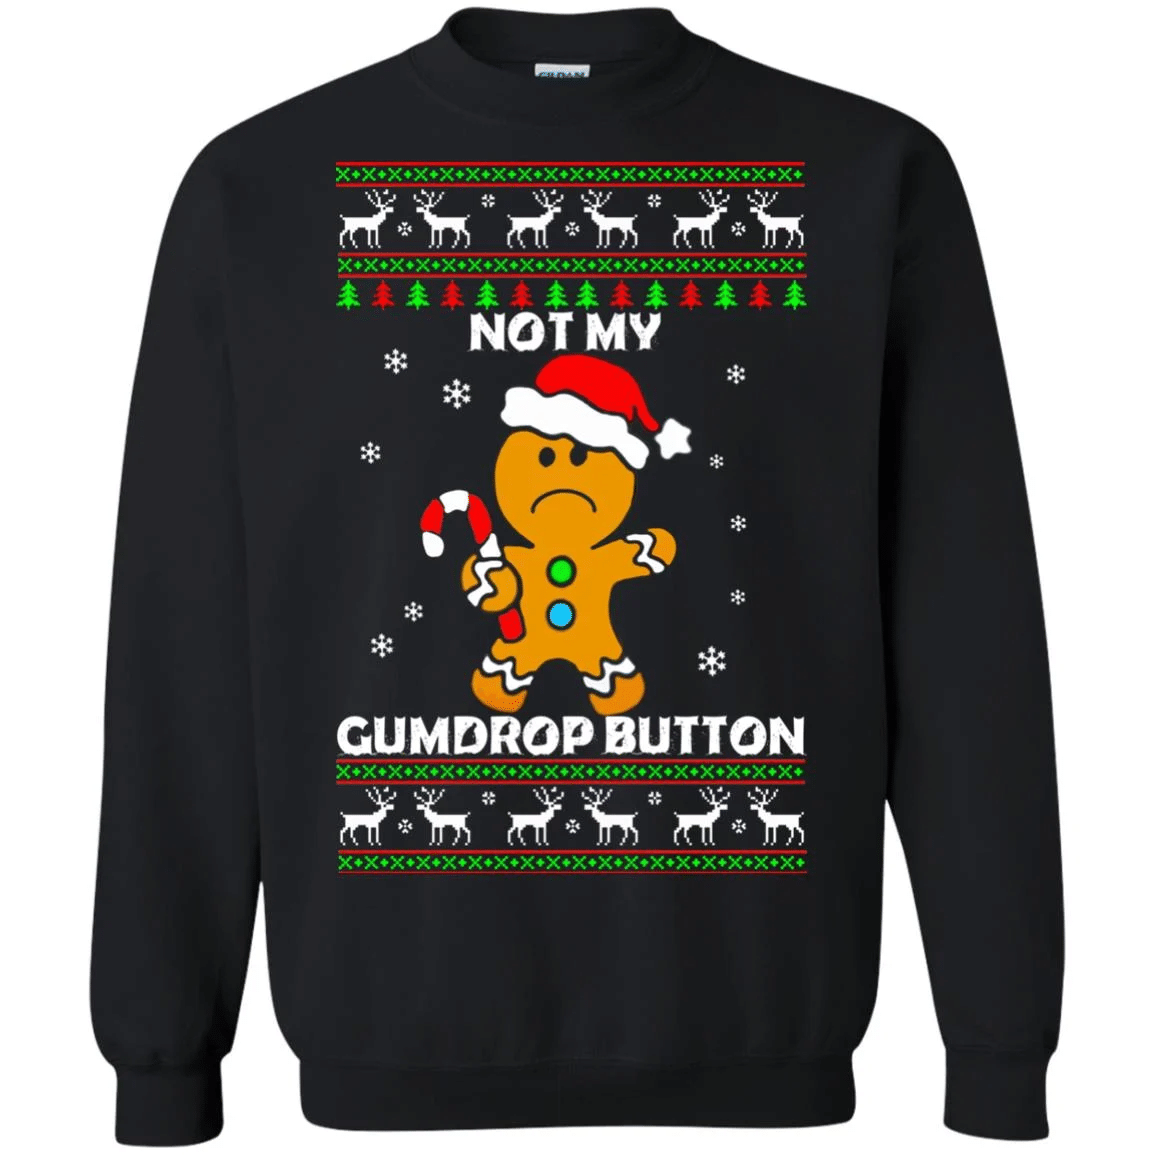 Not My Gumdrop Button Gingerbread And Candy Cane Christmas Sweatshirt Style: Sweatshirt, Color: Black